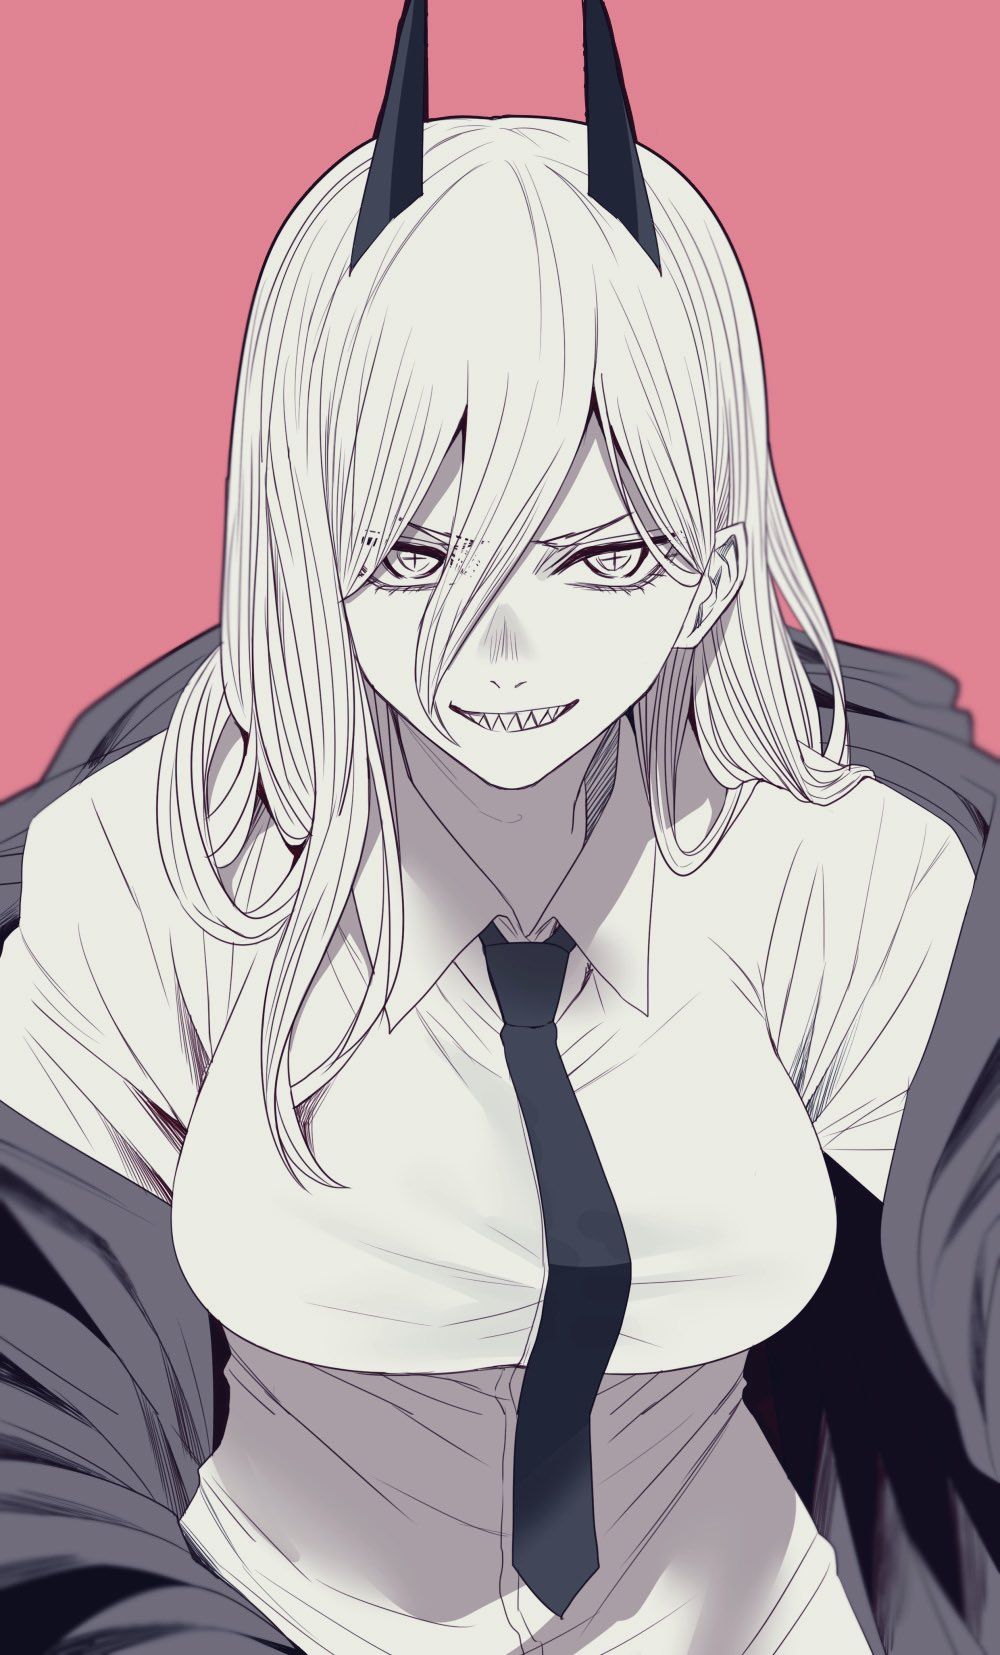 Power (Chainsaw Man) Wiki: Bio, Wallpapers & More